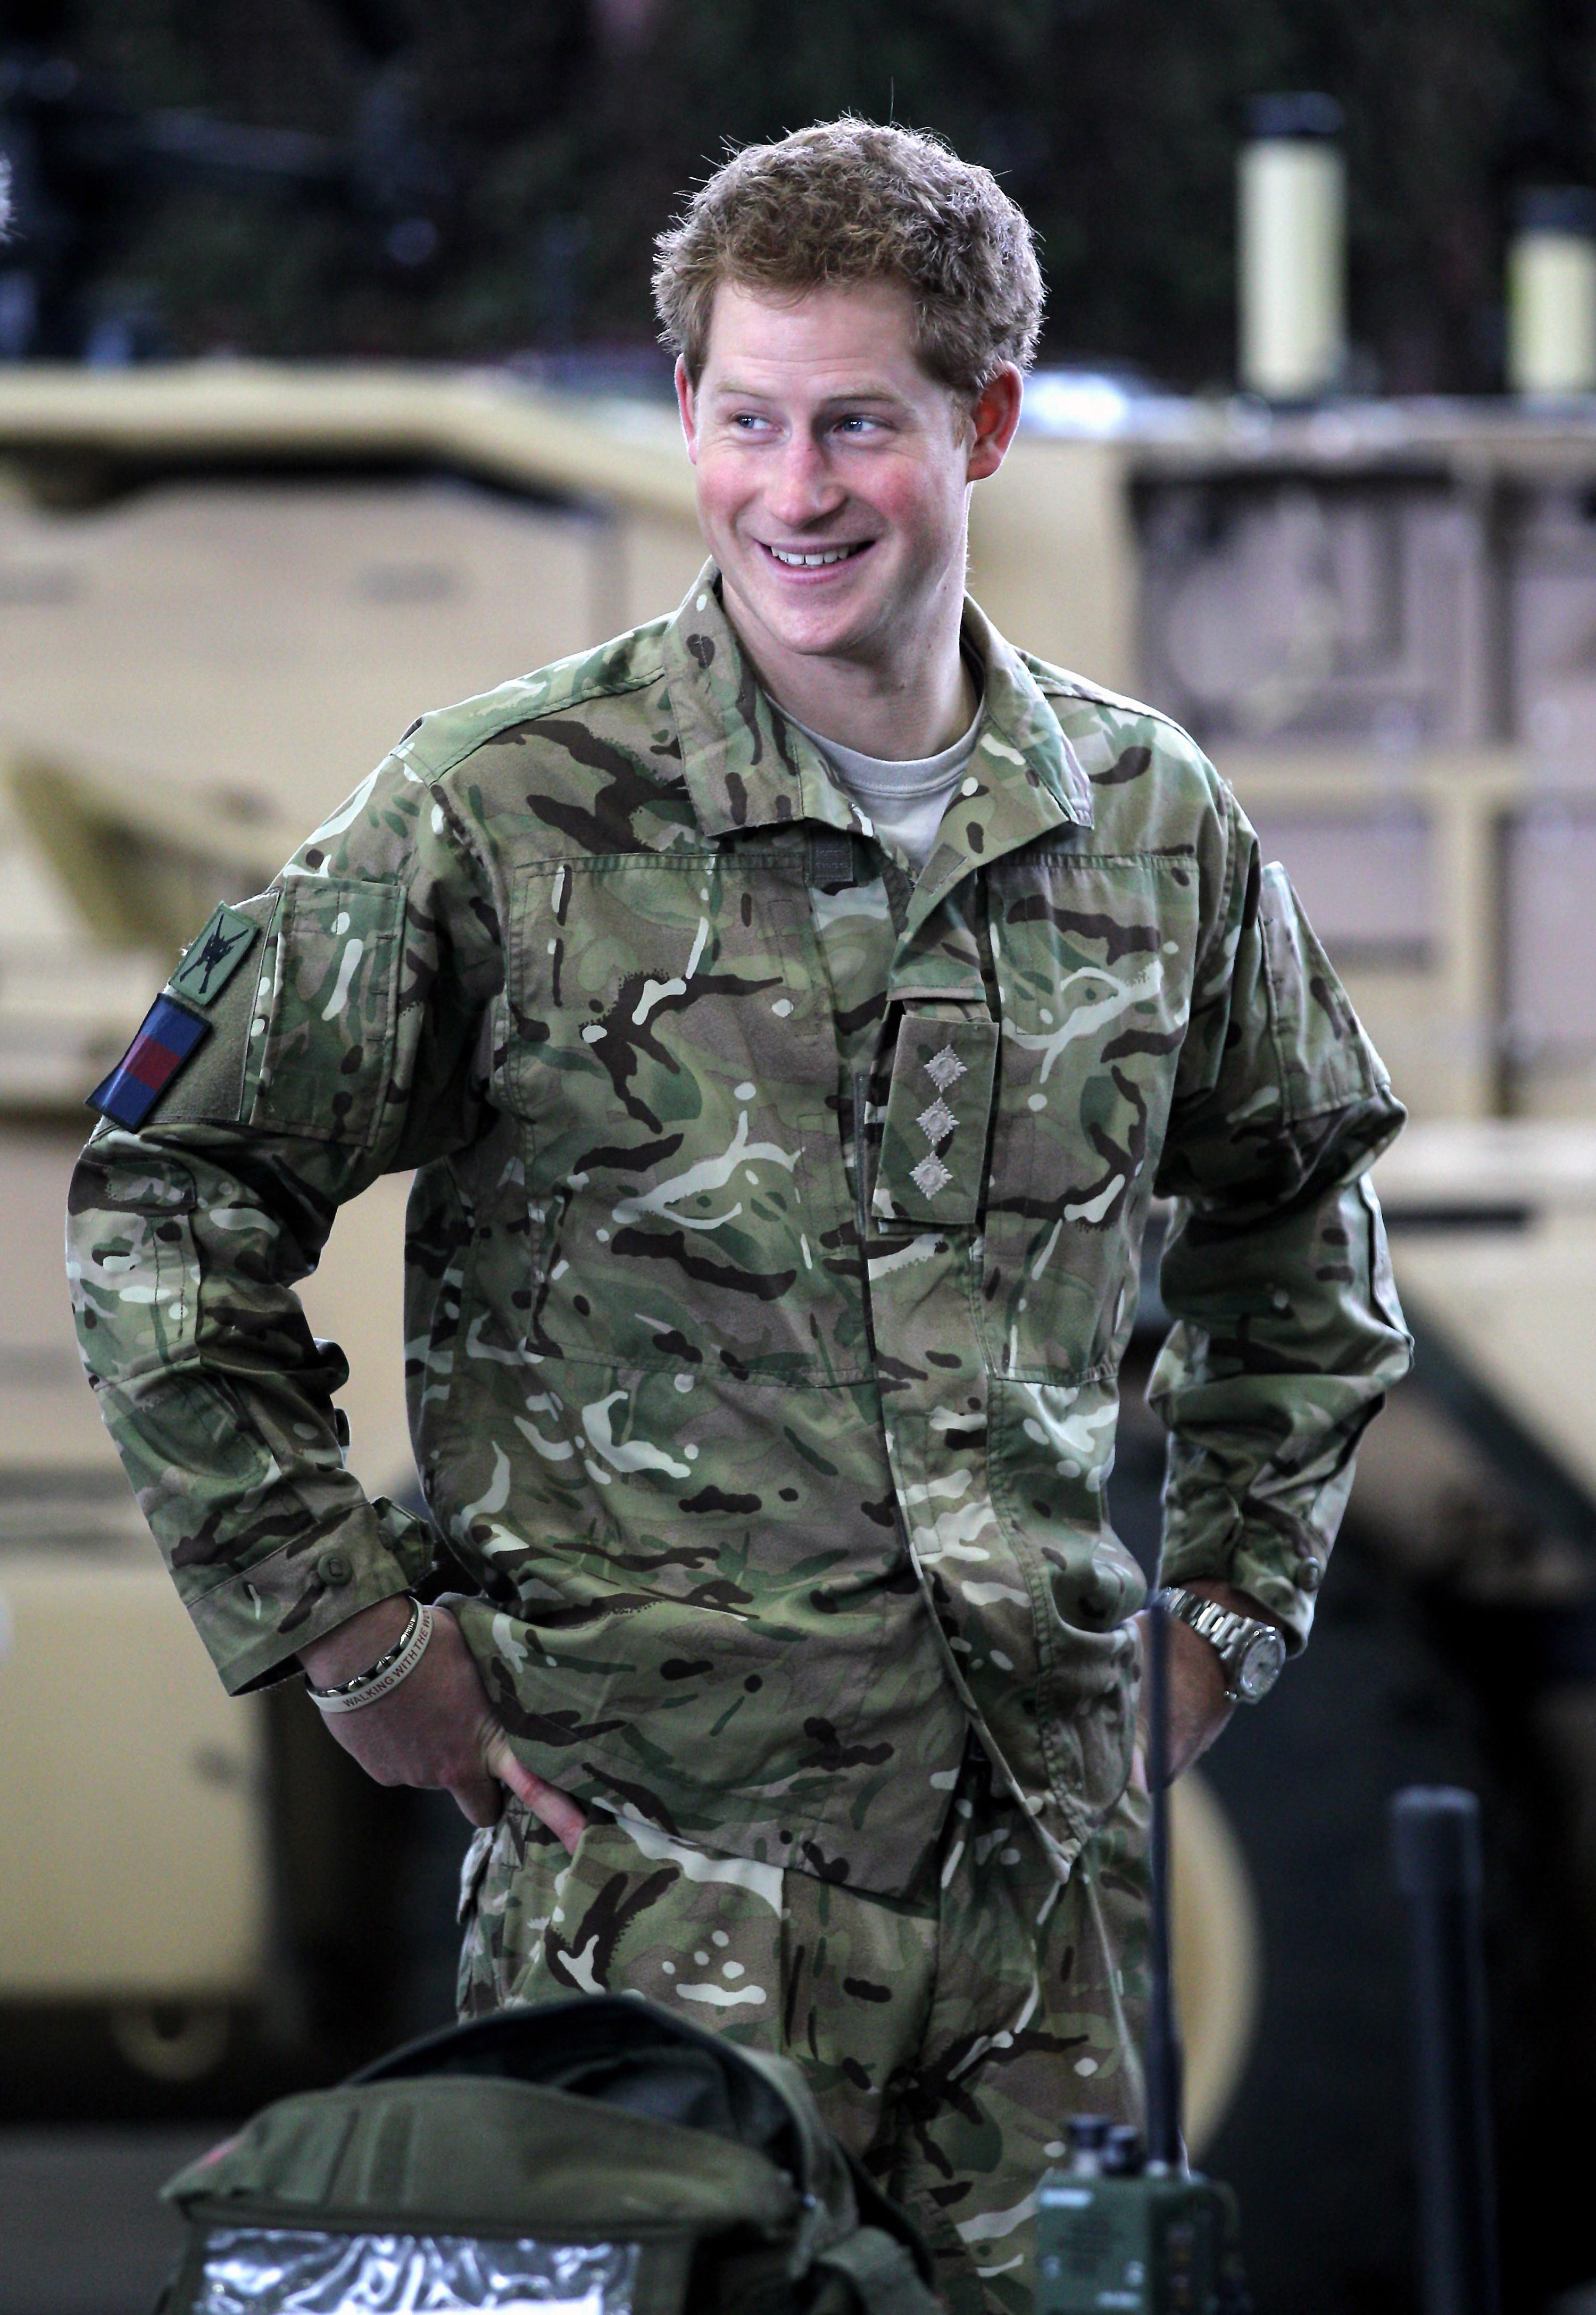 Prince Harry grinning and wearing a military uniform